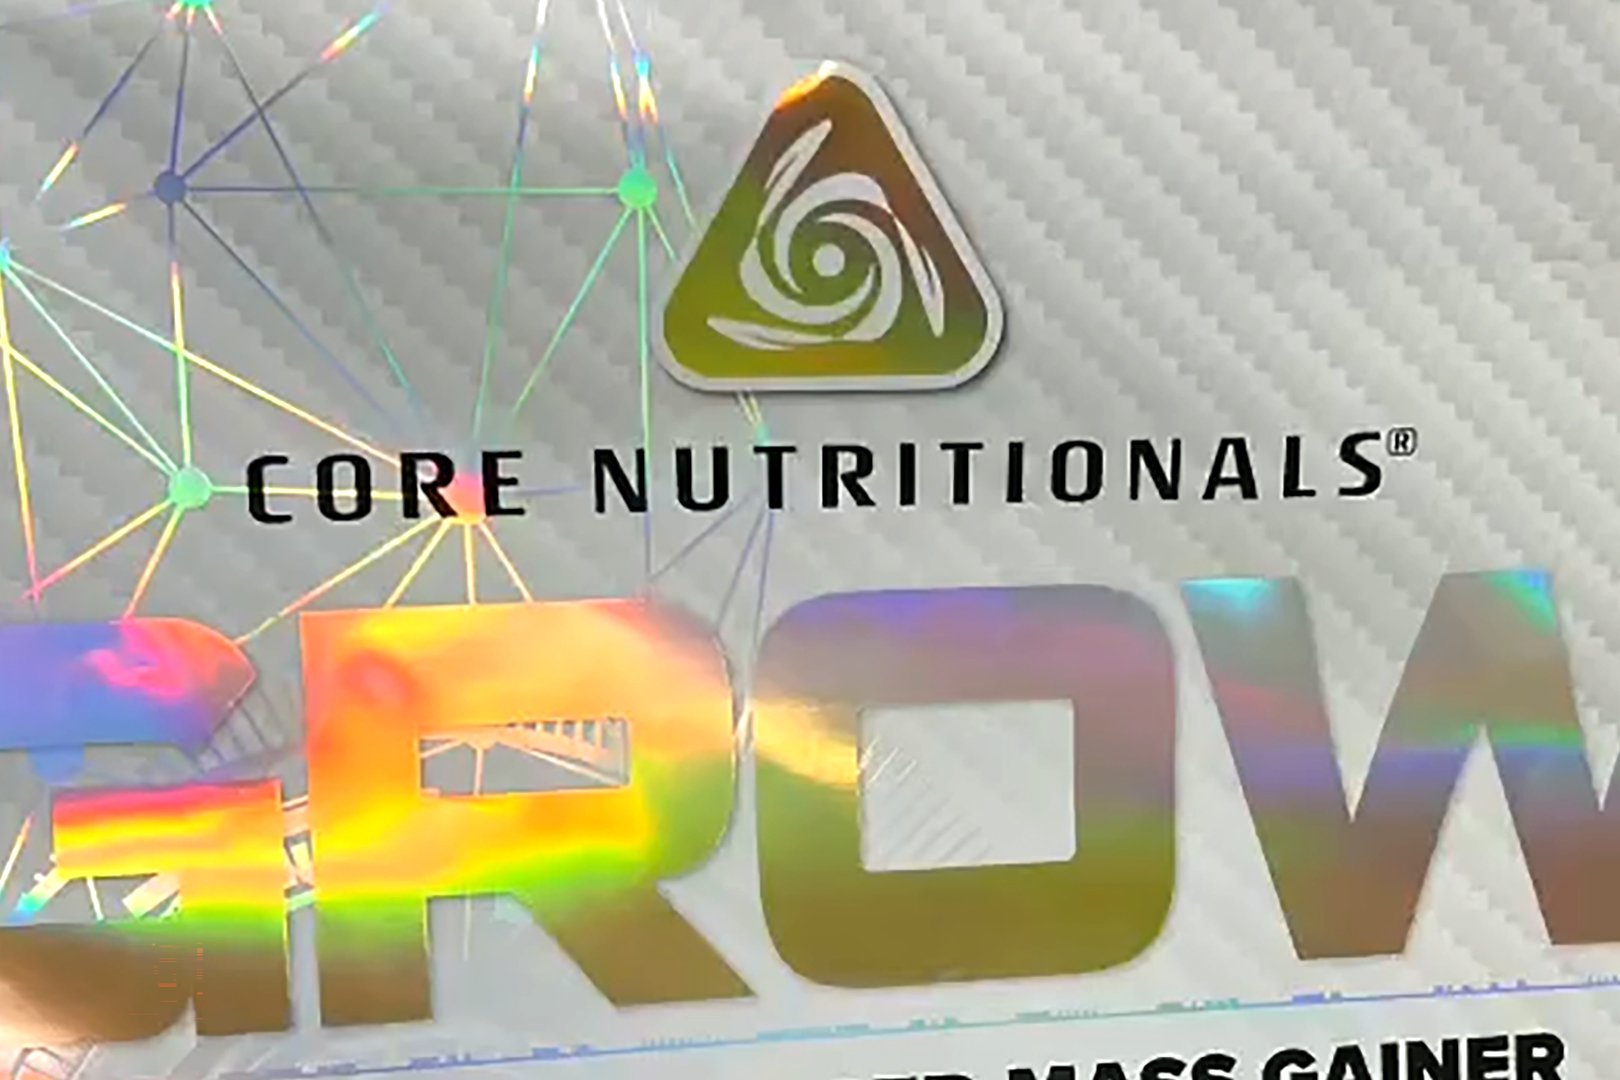 Core Nutritionals Is Bringing Back Core Grow